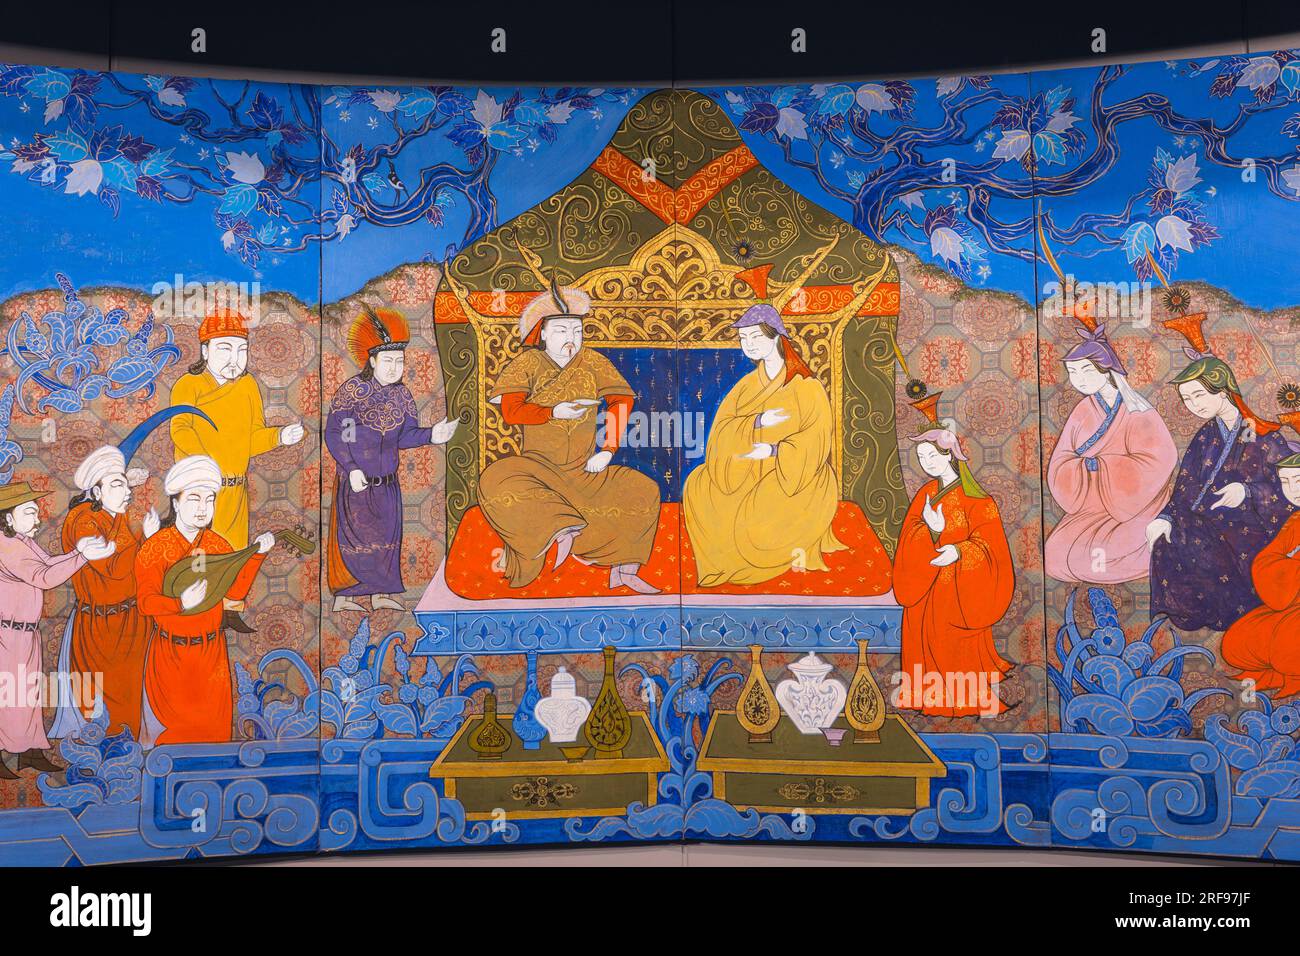 A Persian miniature painting inside information center of the Genghis Khan Equestrian Statue (130 feet tall), which is part of the Genghis Khan Statue Stock Photo